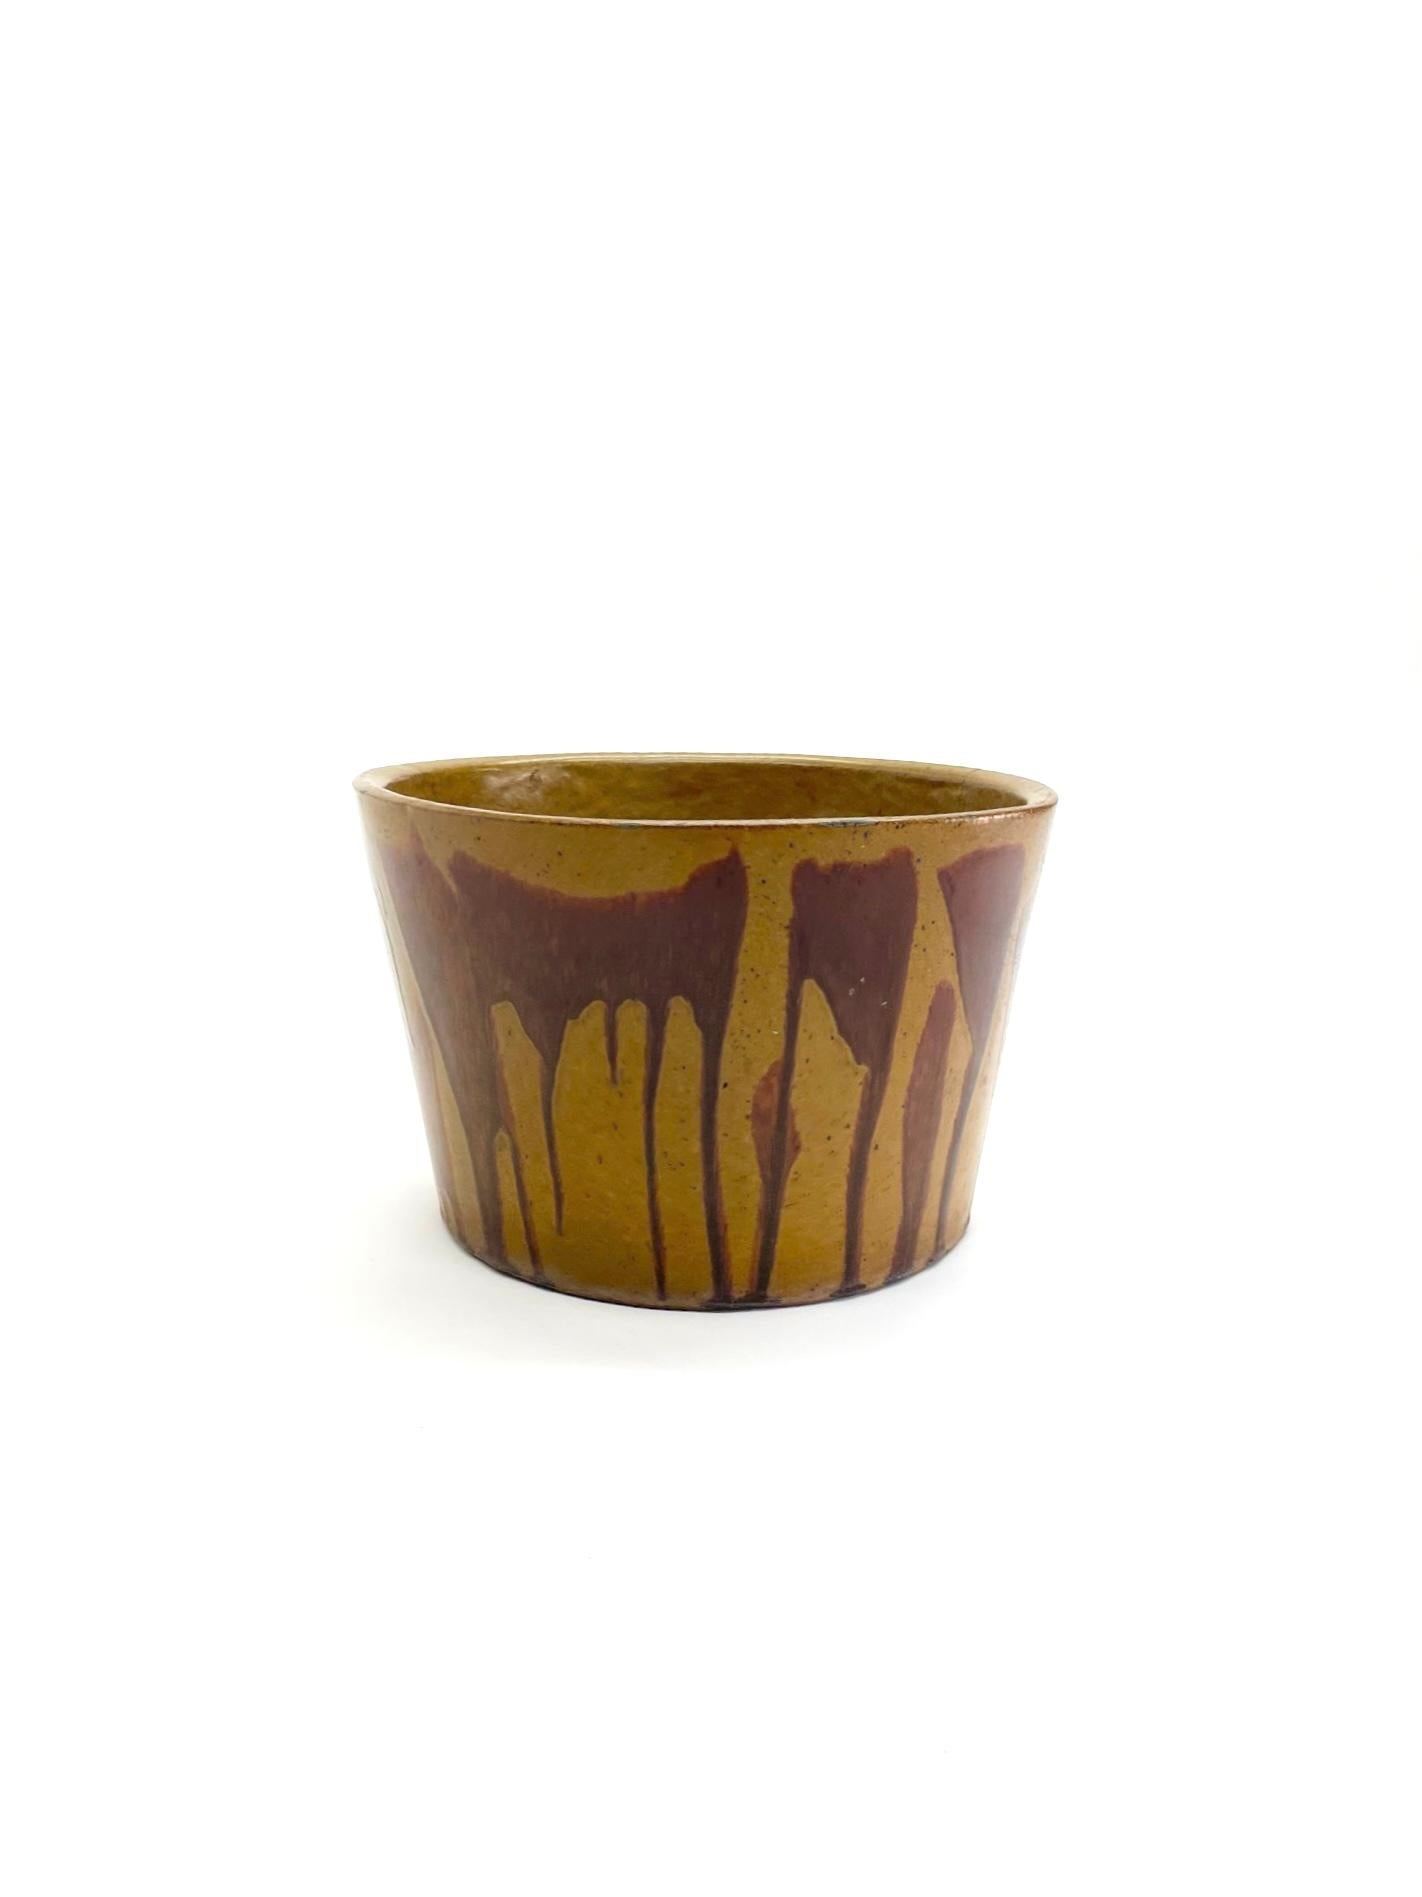 Mid-Century Modern David Cressey, Flame Glazed Planter, model S-12 by Architectural Pottery